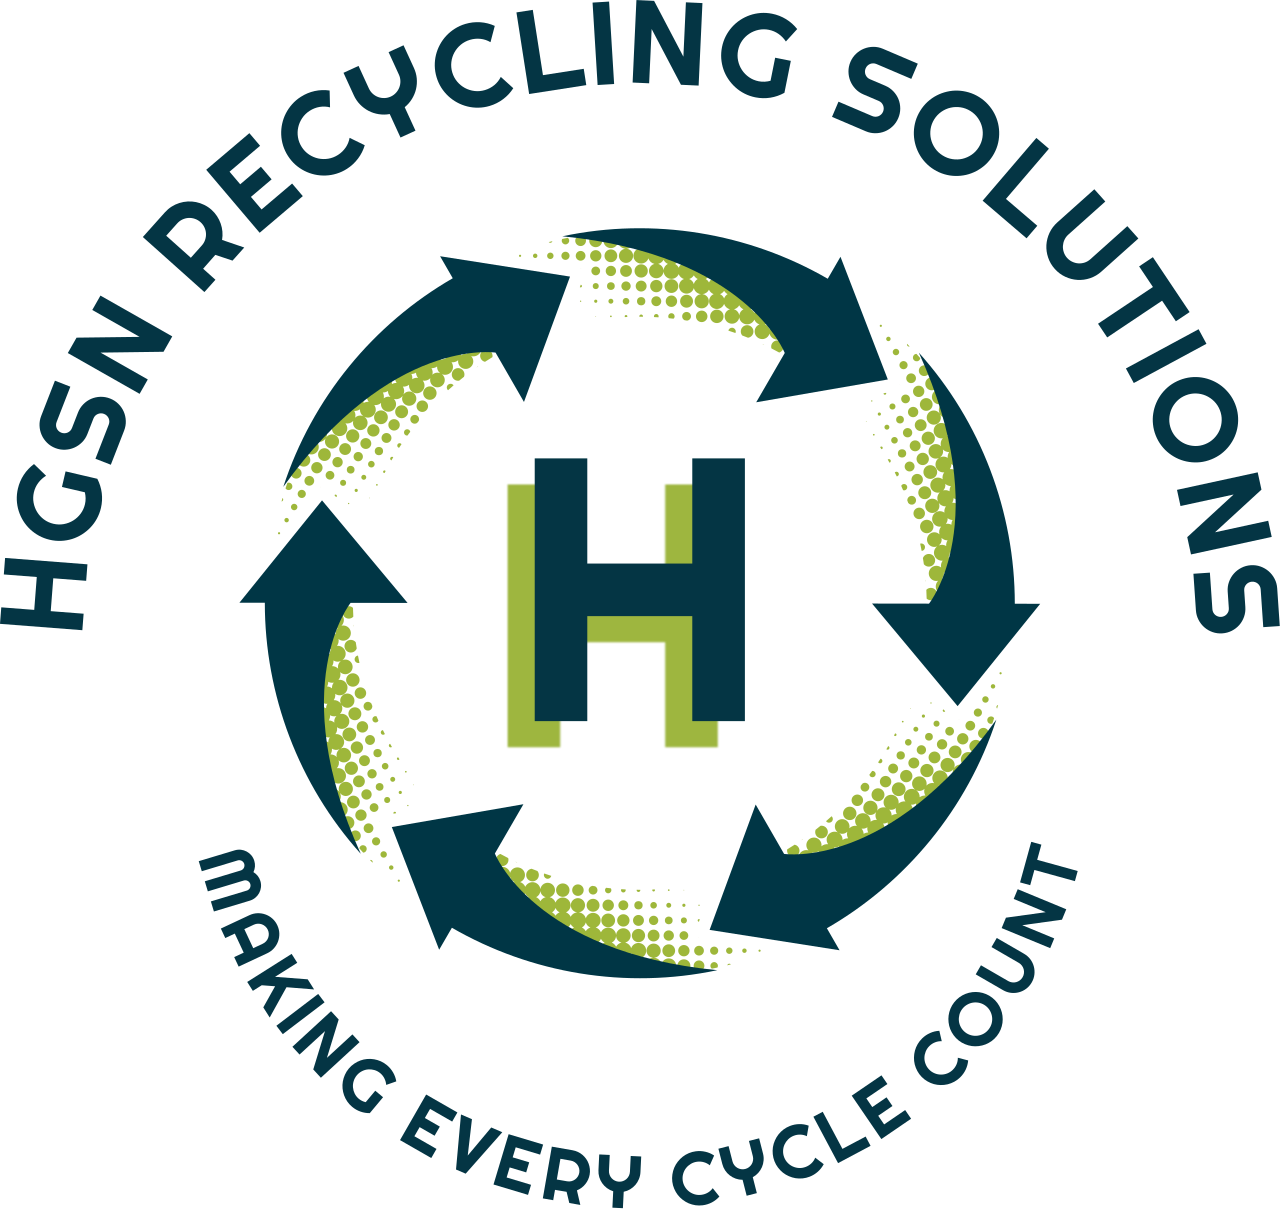 HGSN RECYCLING SOLUTIONS's logo